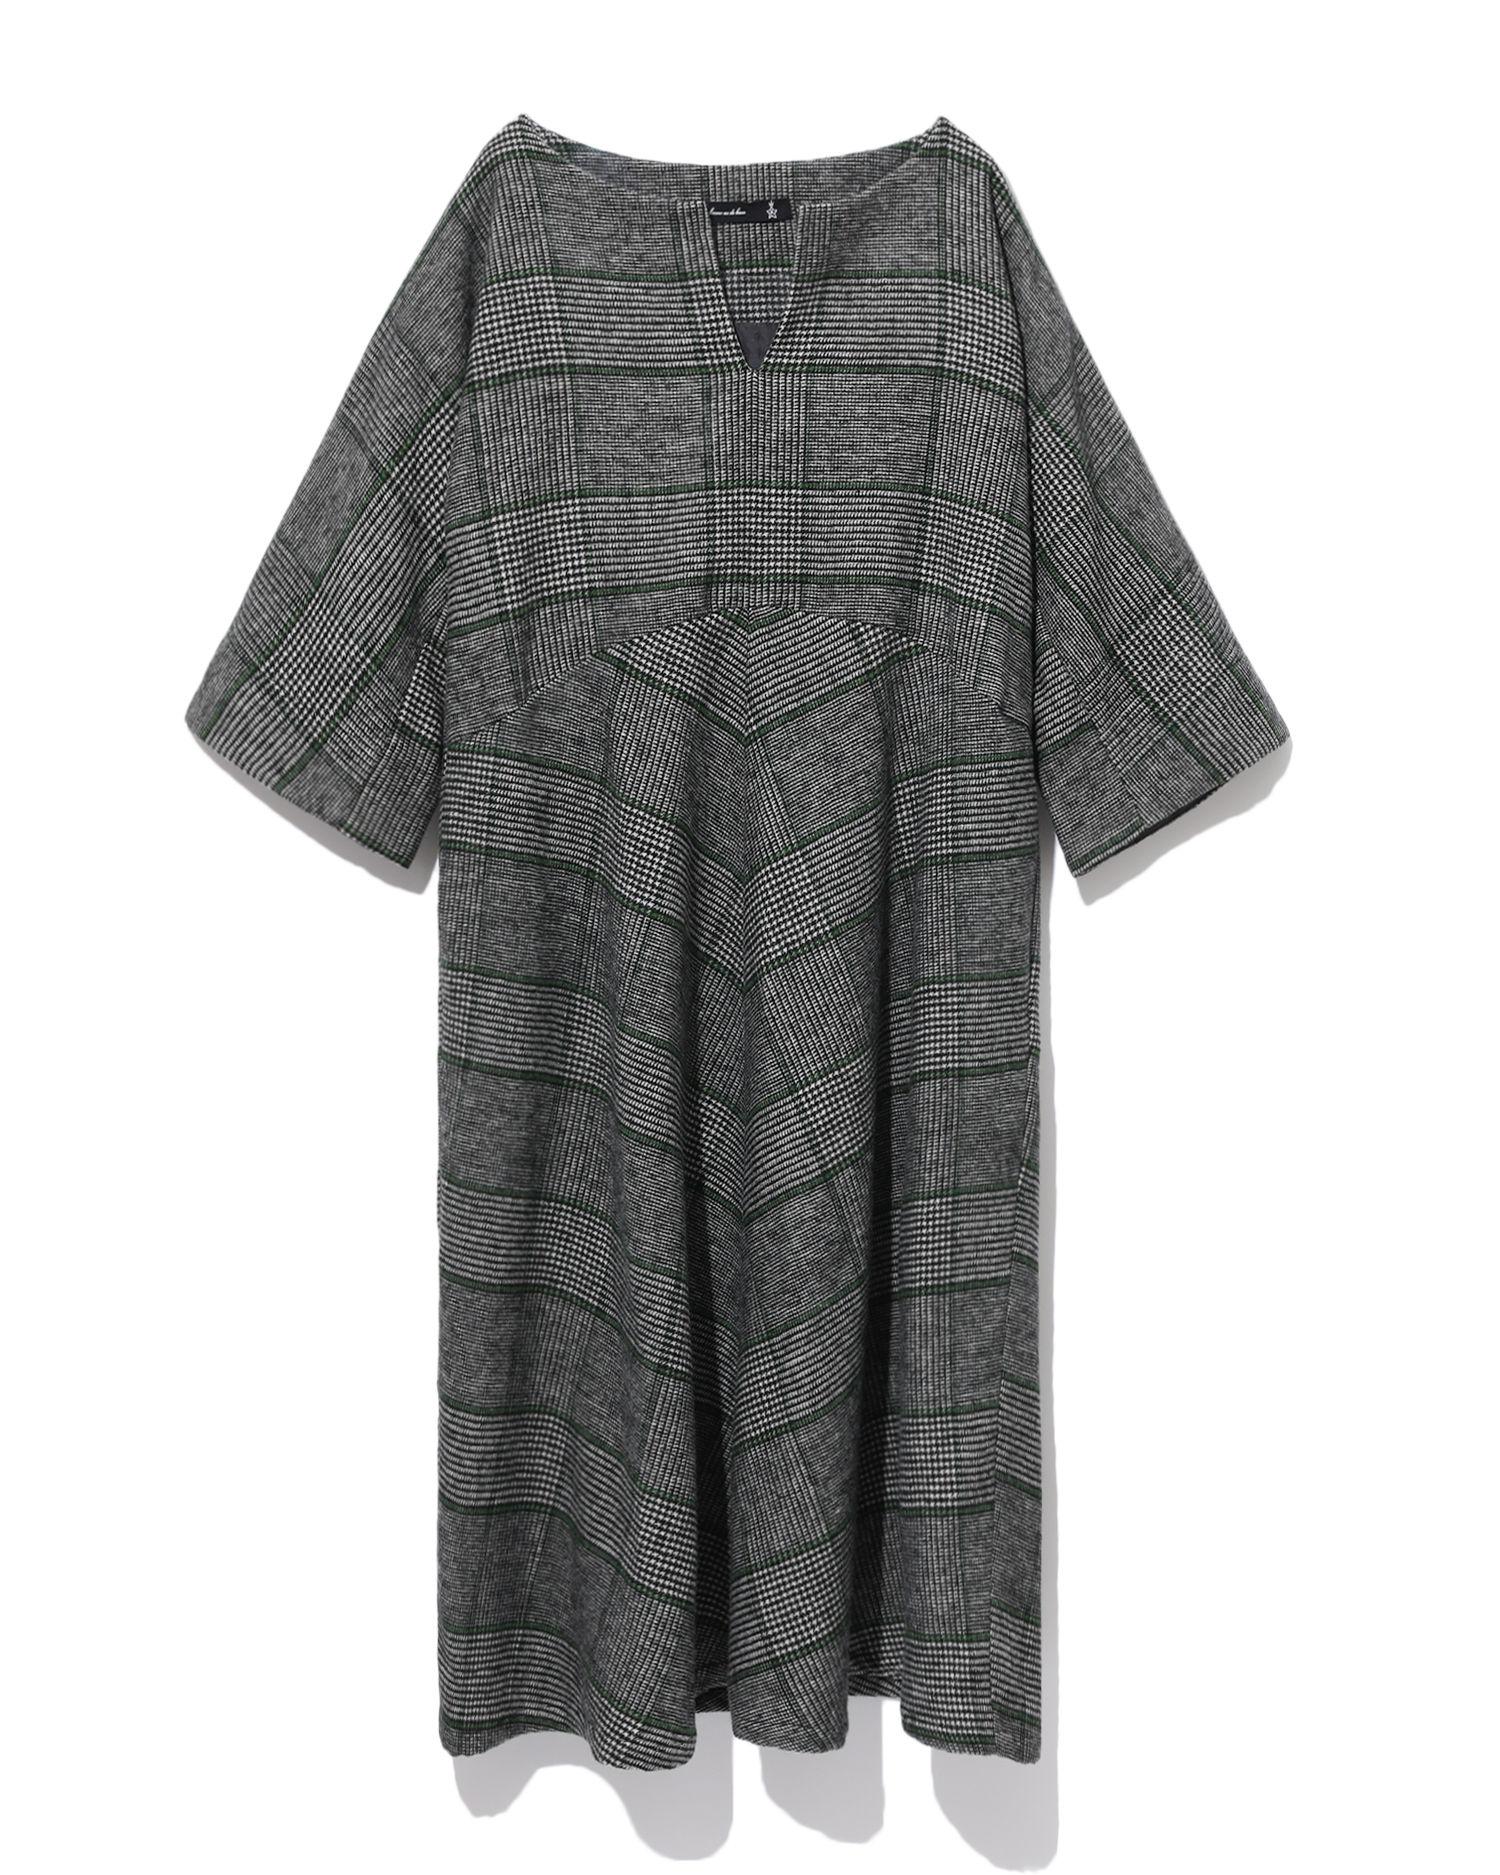 Plaid wool-blend dress by AS KNOW AS